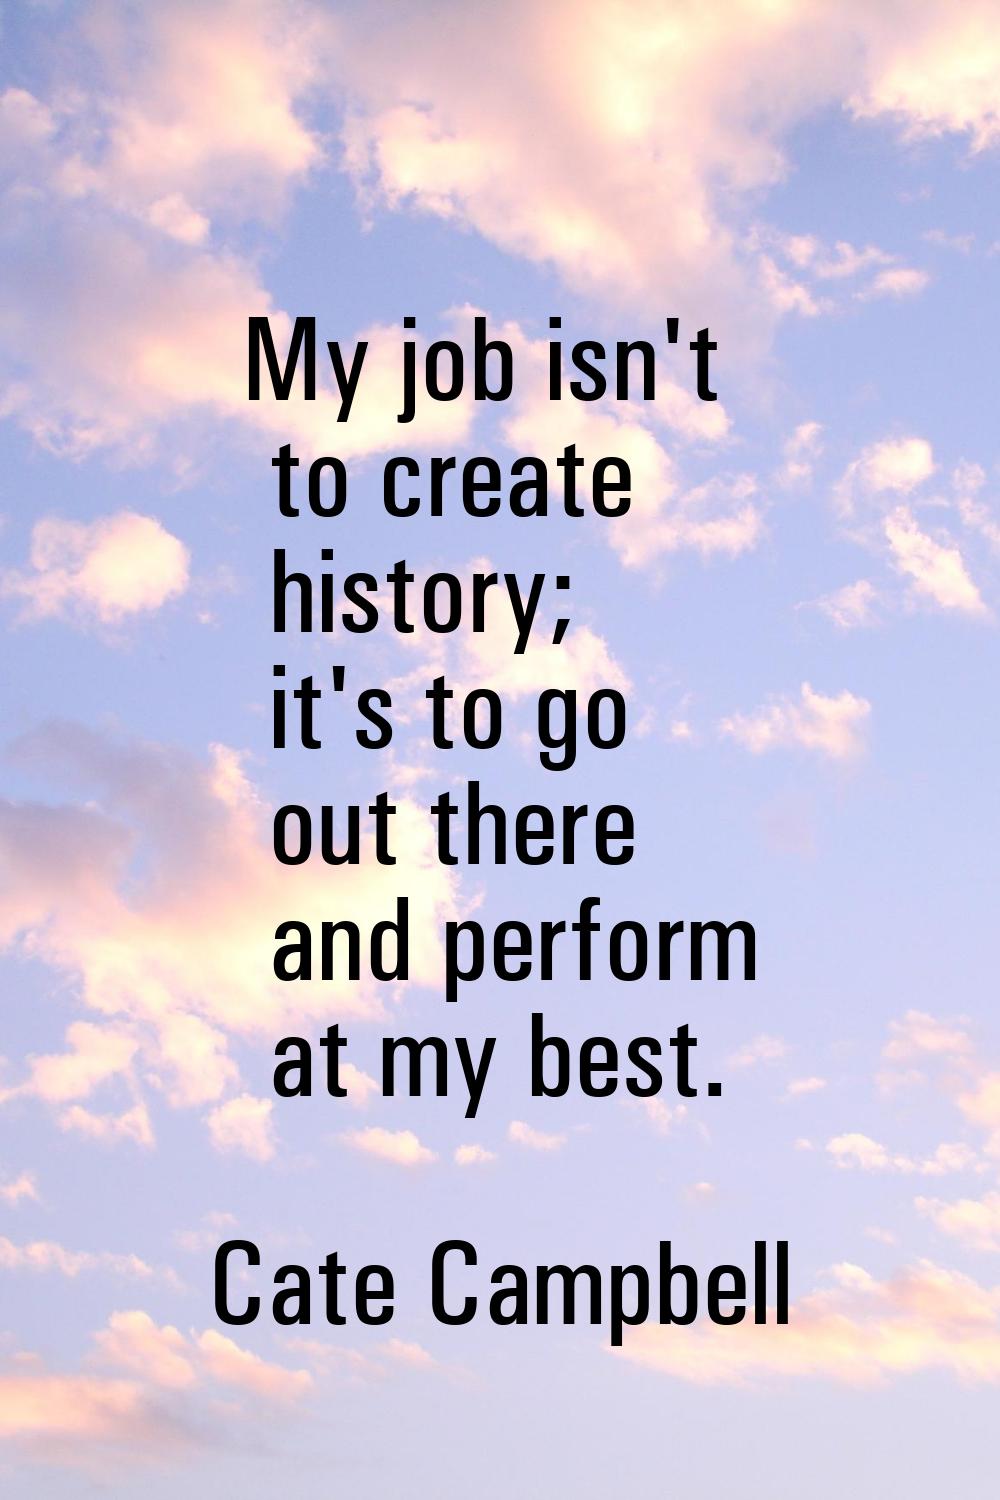 My job isn't to create history; it's to go out there and perform at my best.